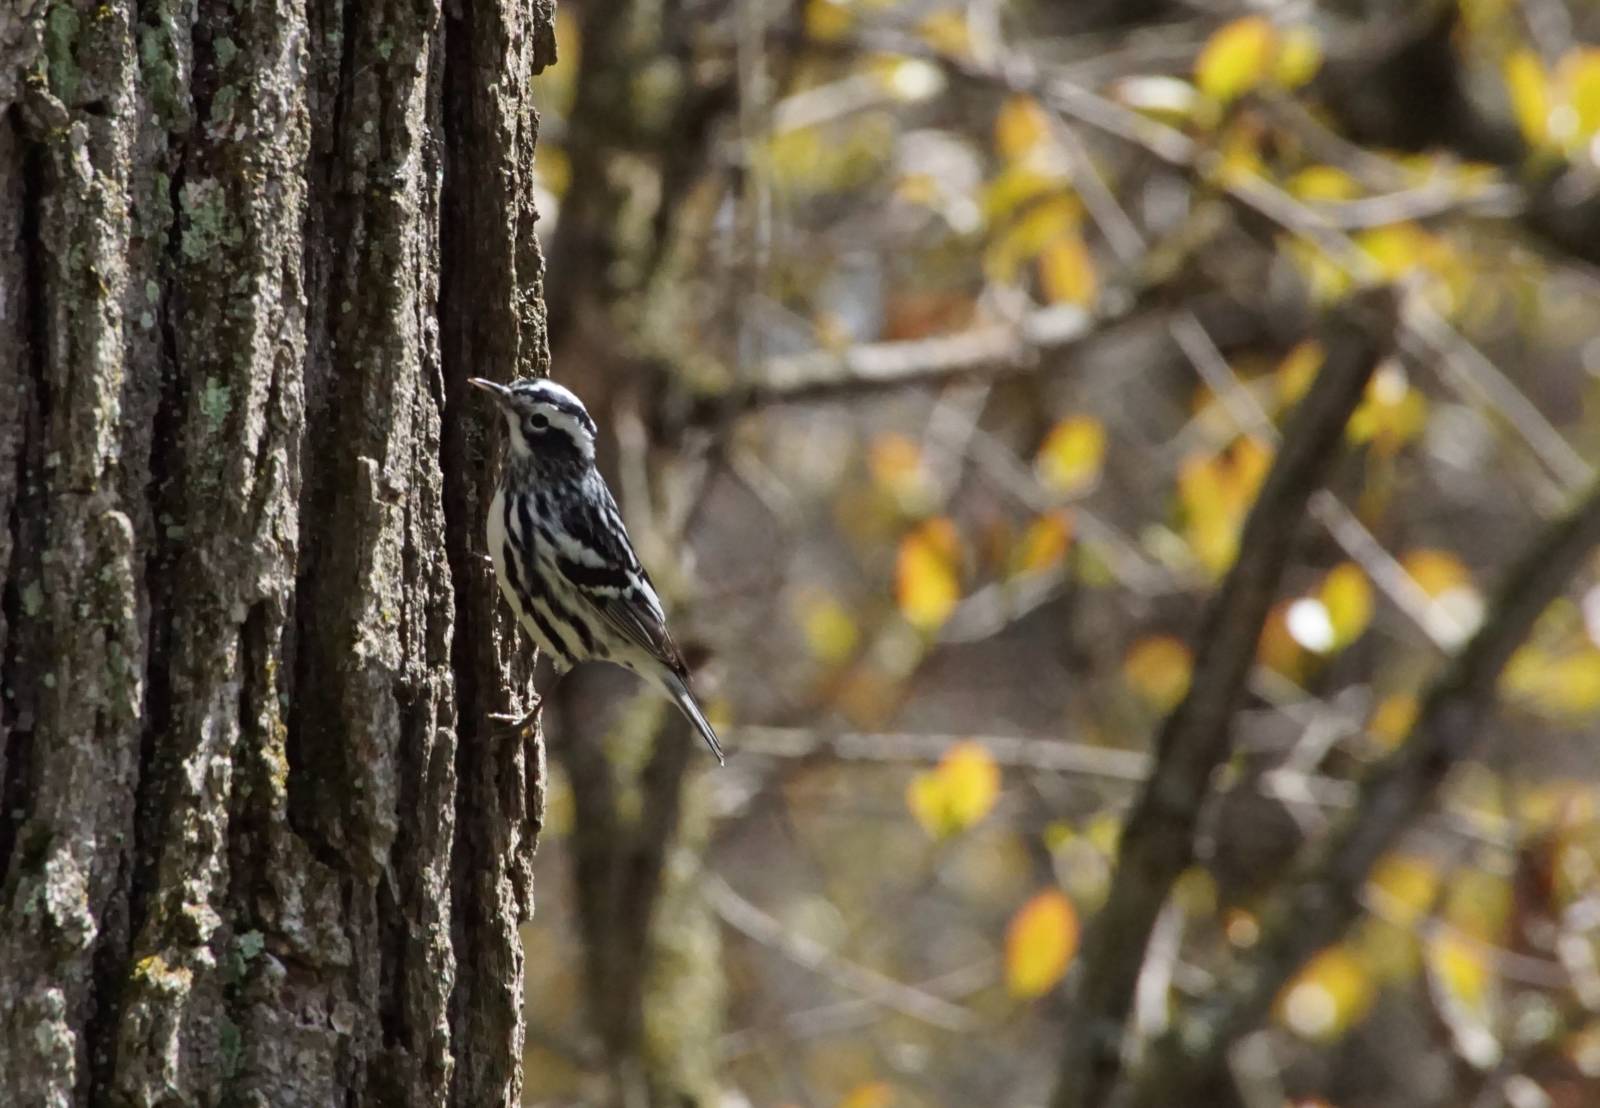 a black and white warbler perched on a branch next to a tree trunk